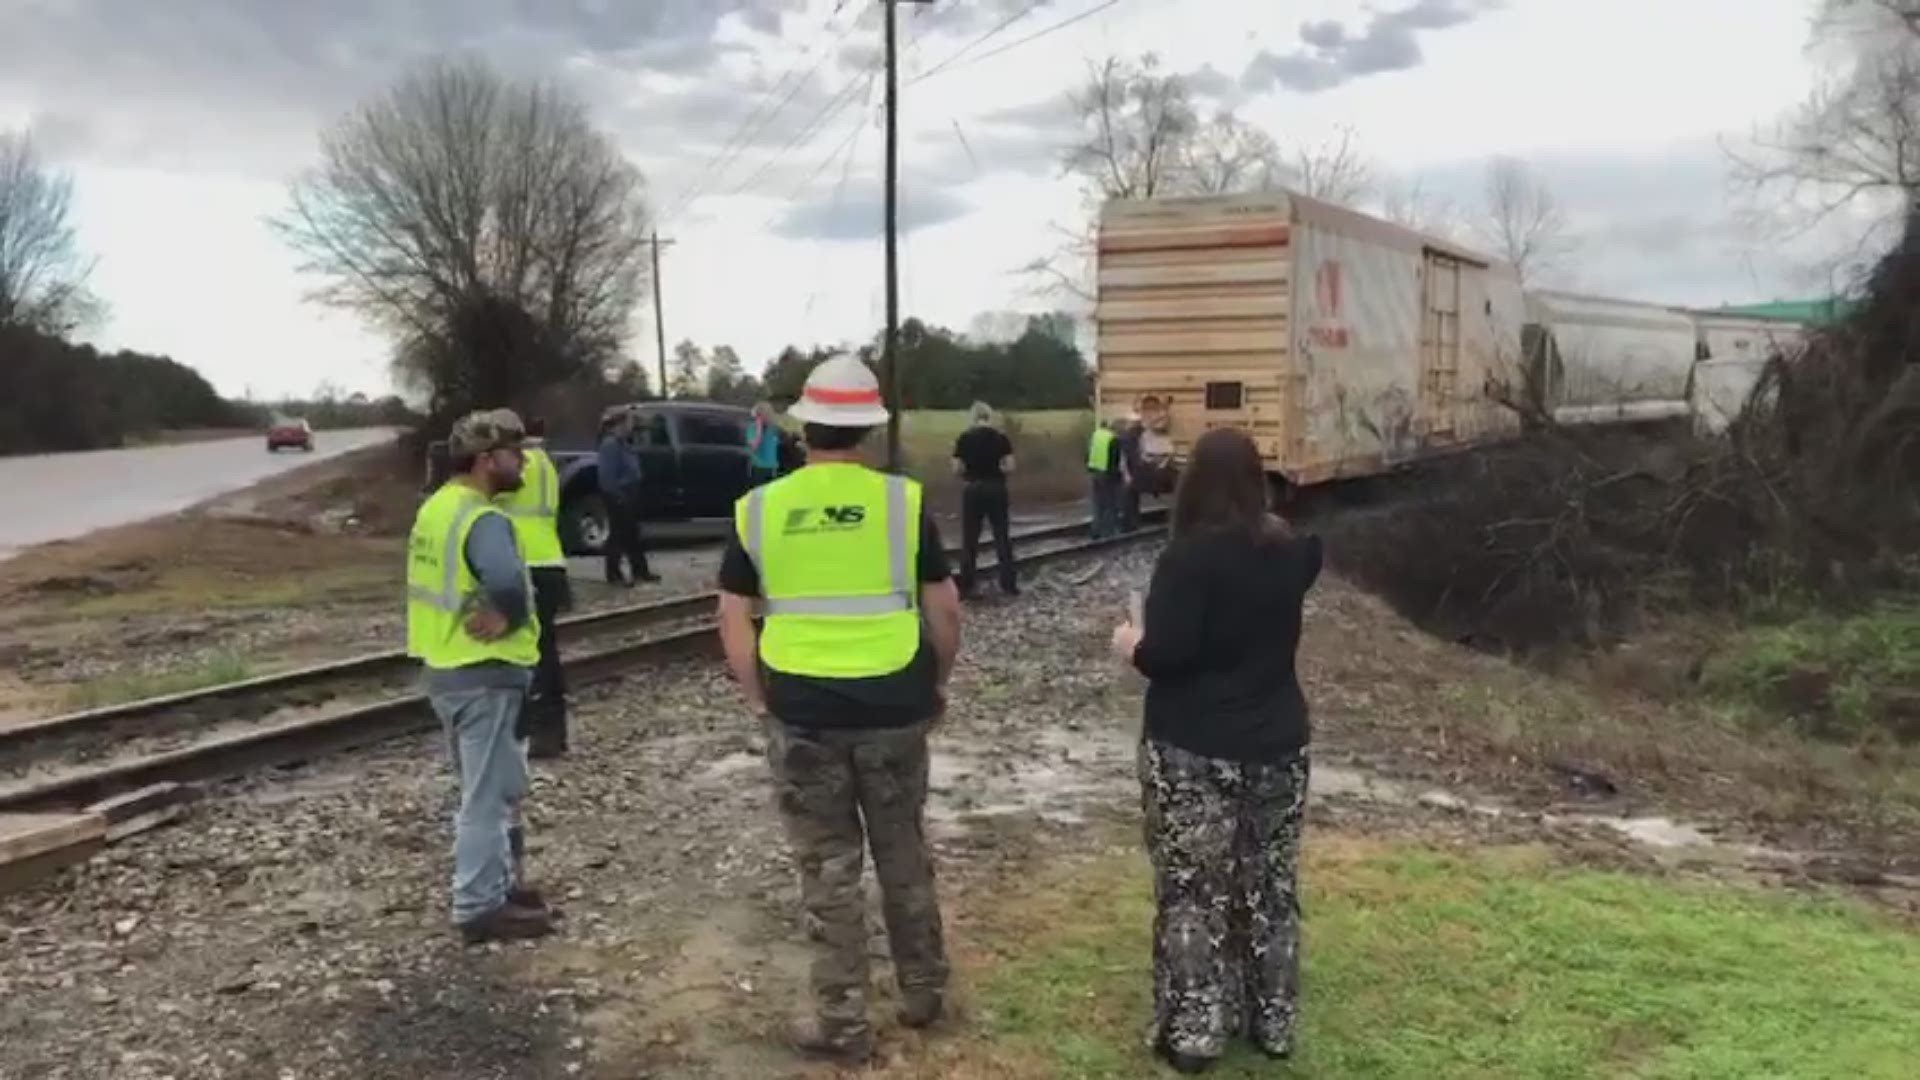 According to Houston County EMA Director Chris Stoner, a train car carrying potatoes for the company had a couple wheels come off the track.